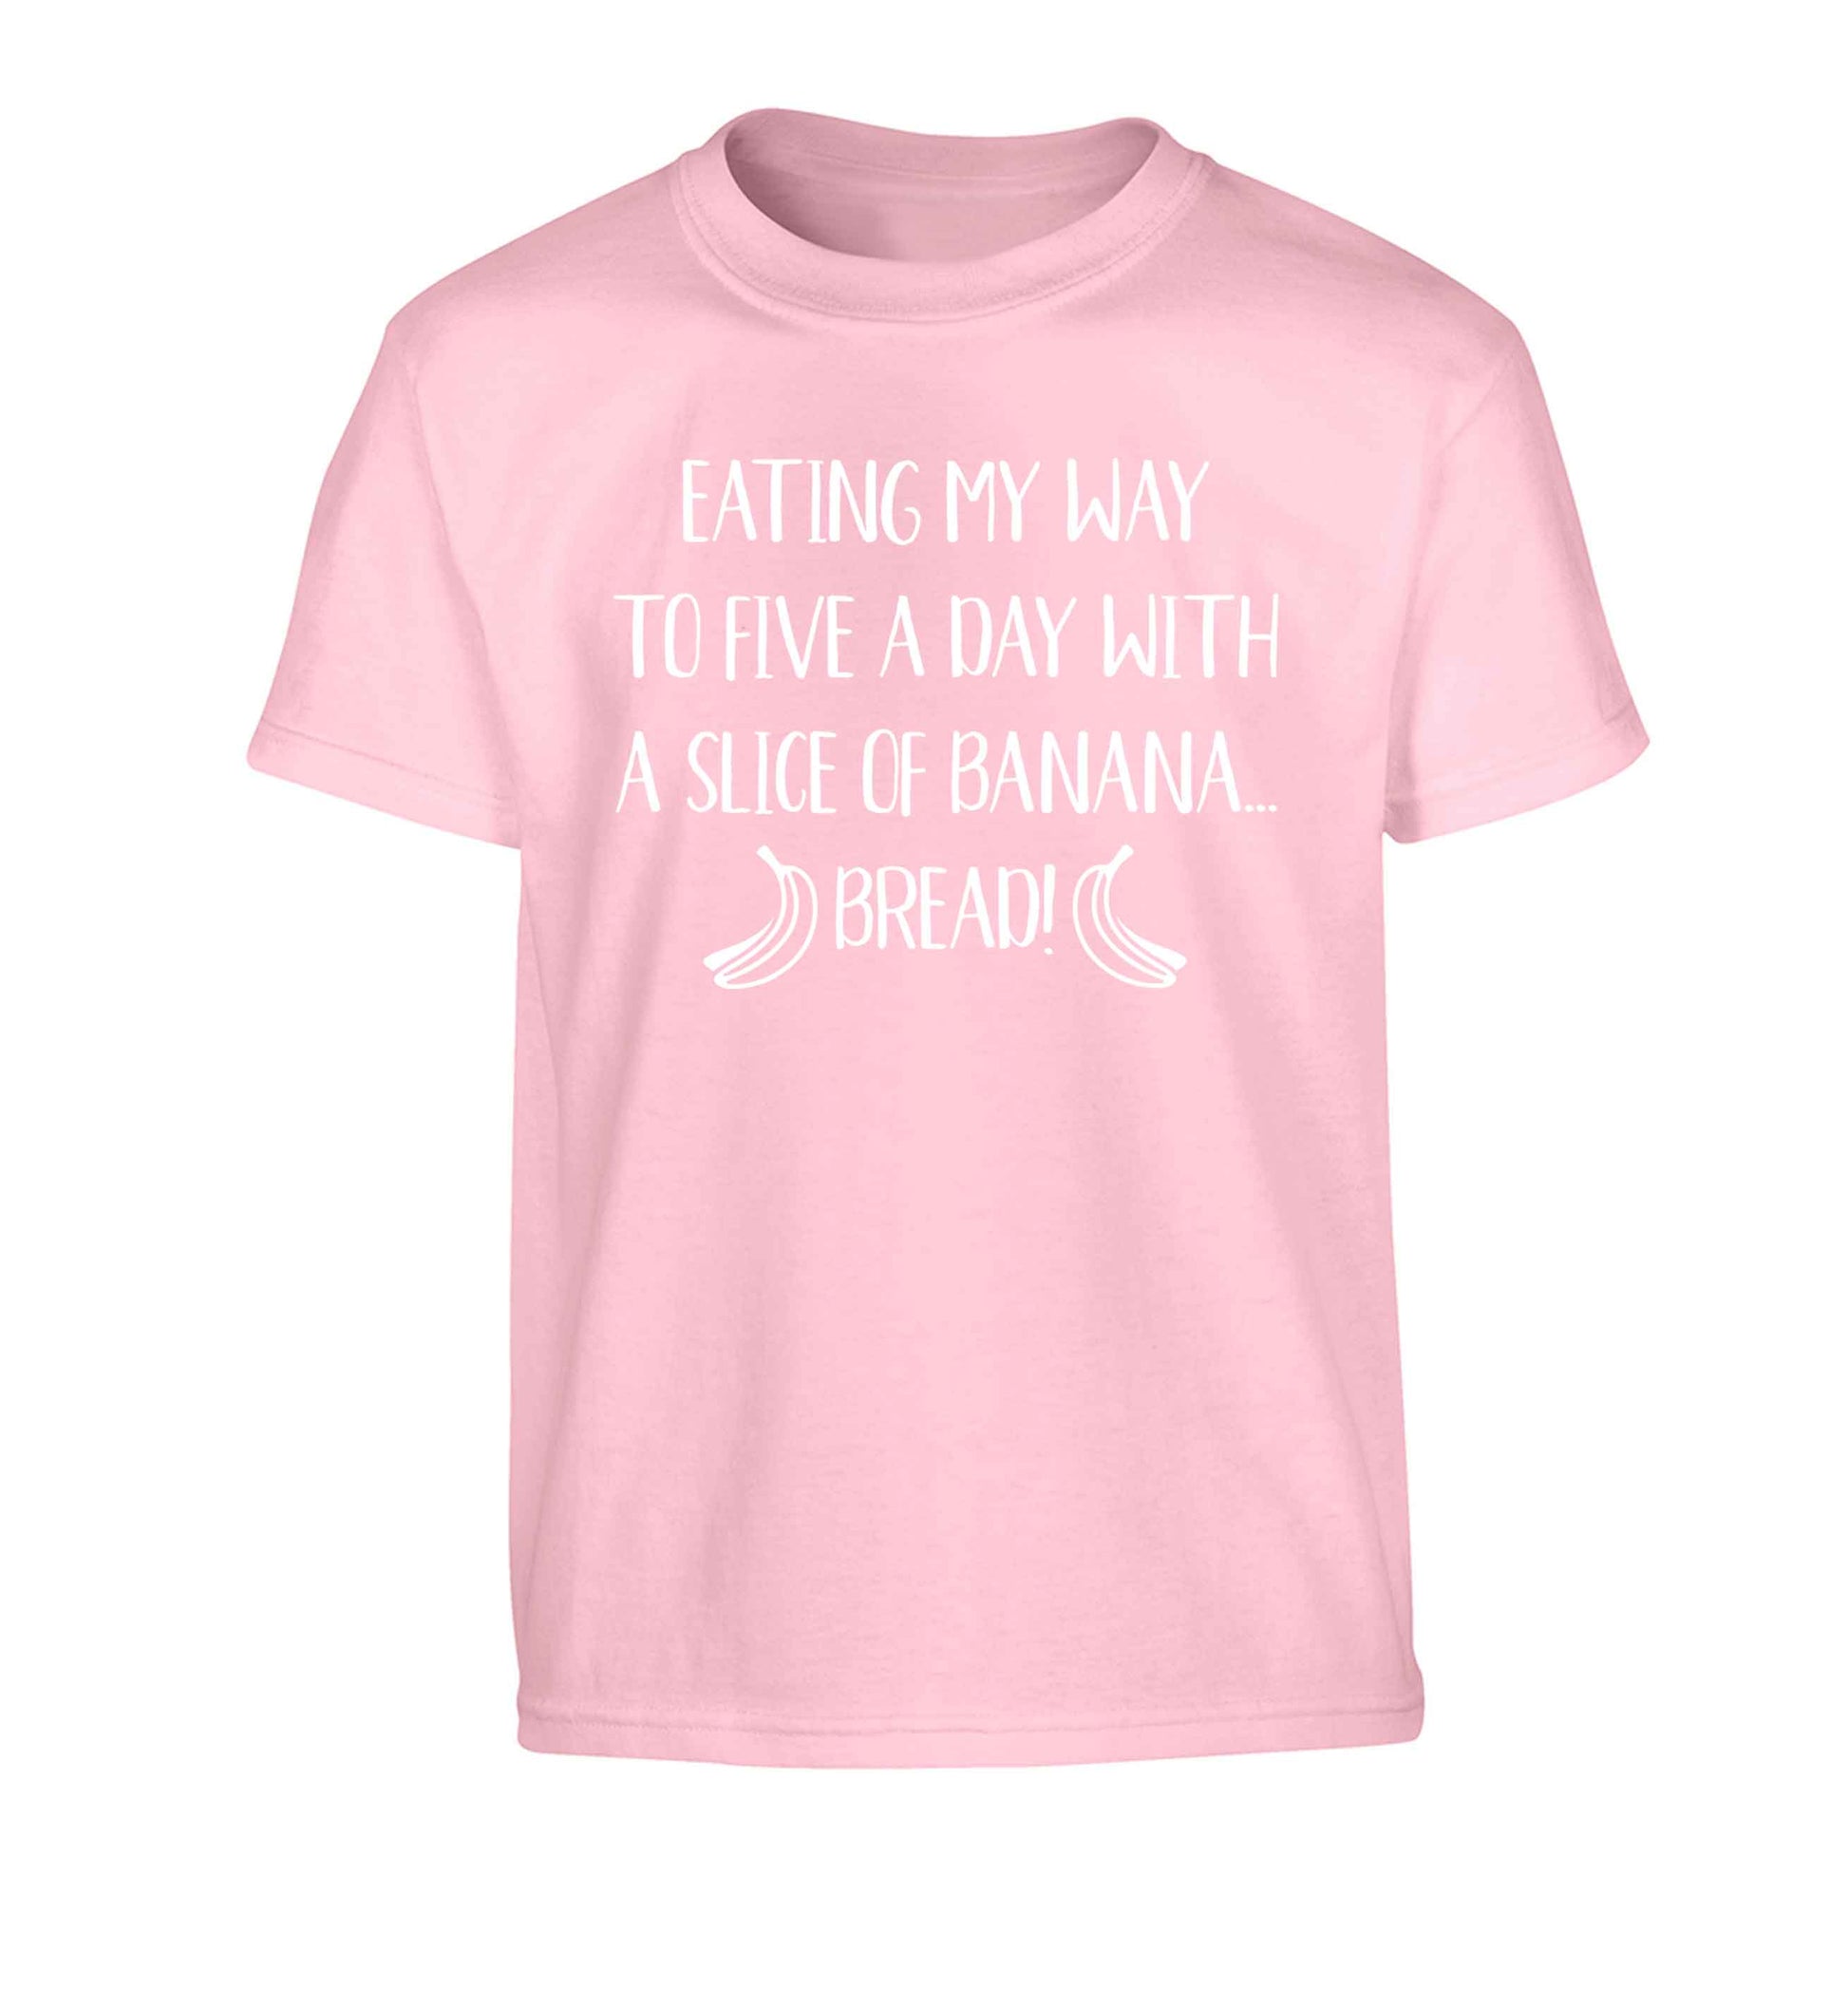 Eating my way to five a day with a slice of banana bread Children's light pink Tshirt 12-13 Years